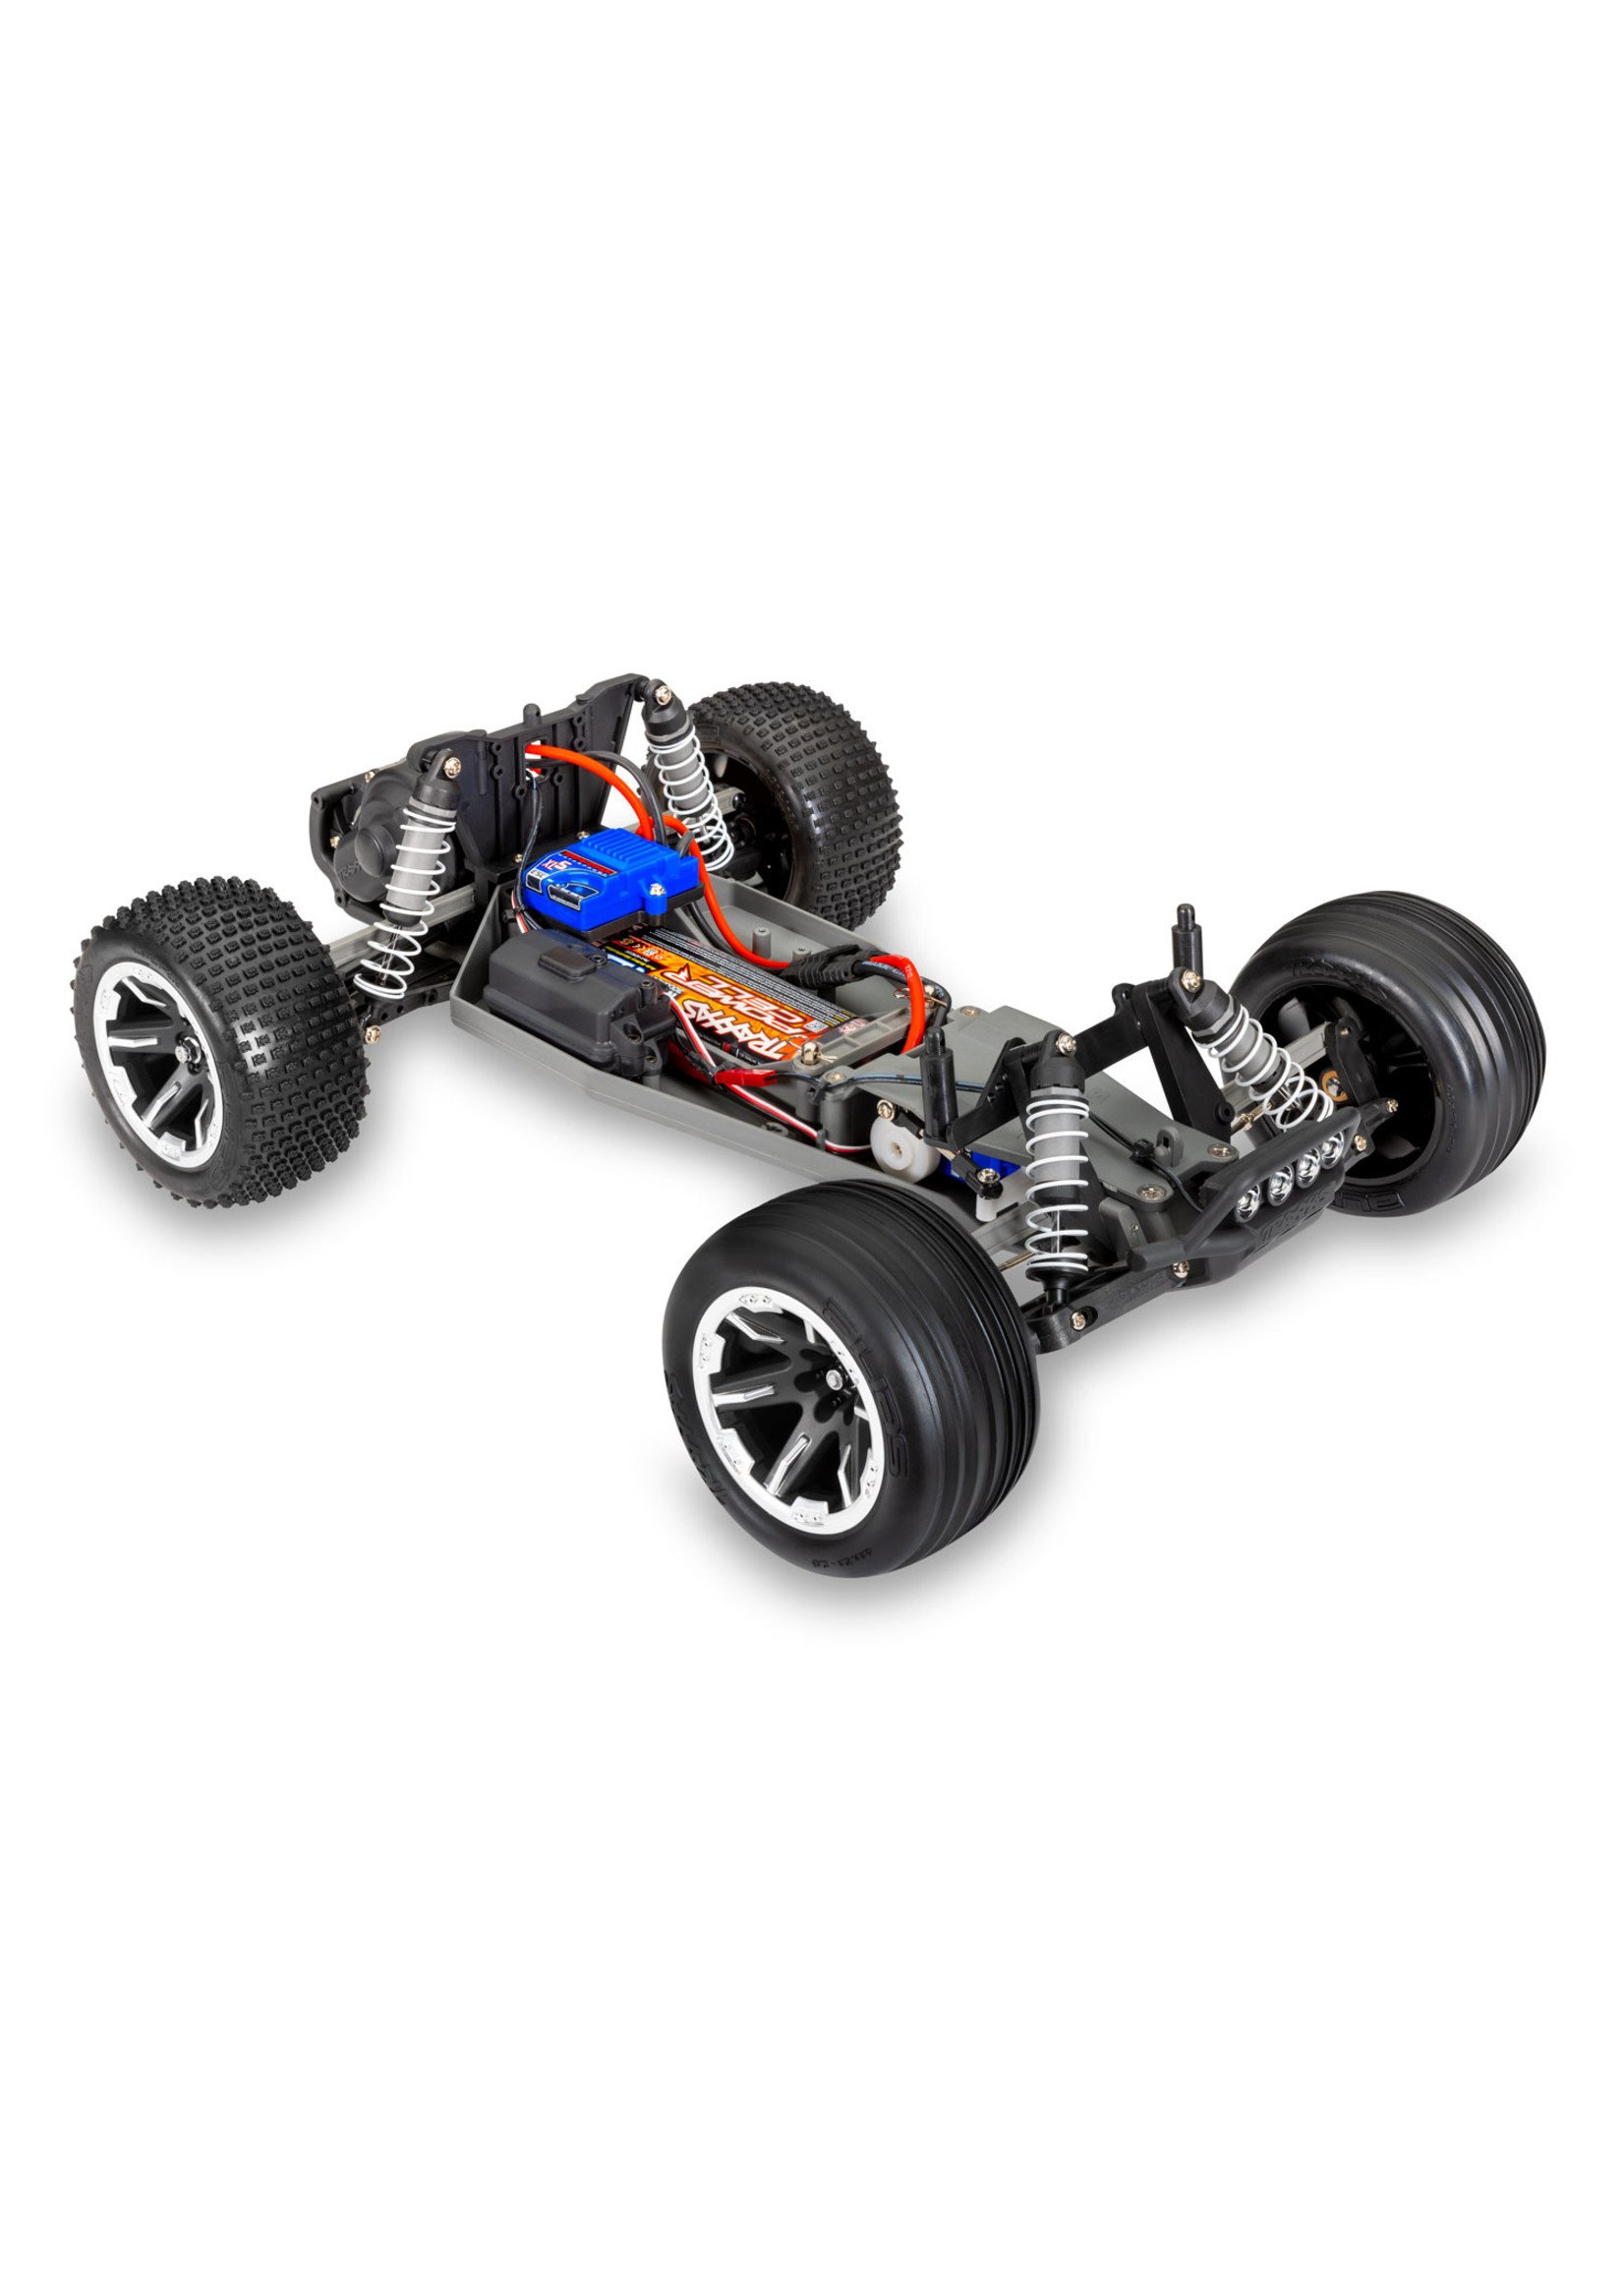 Traxxas 1/10 Rustler 2WD RTR Stadium Truck with Lights - Red